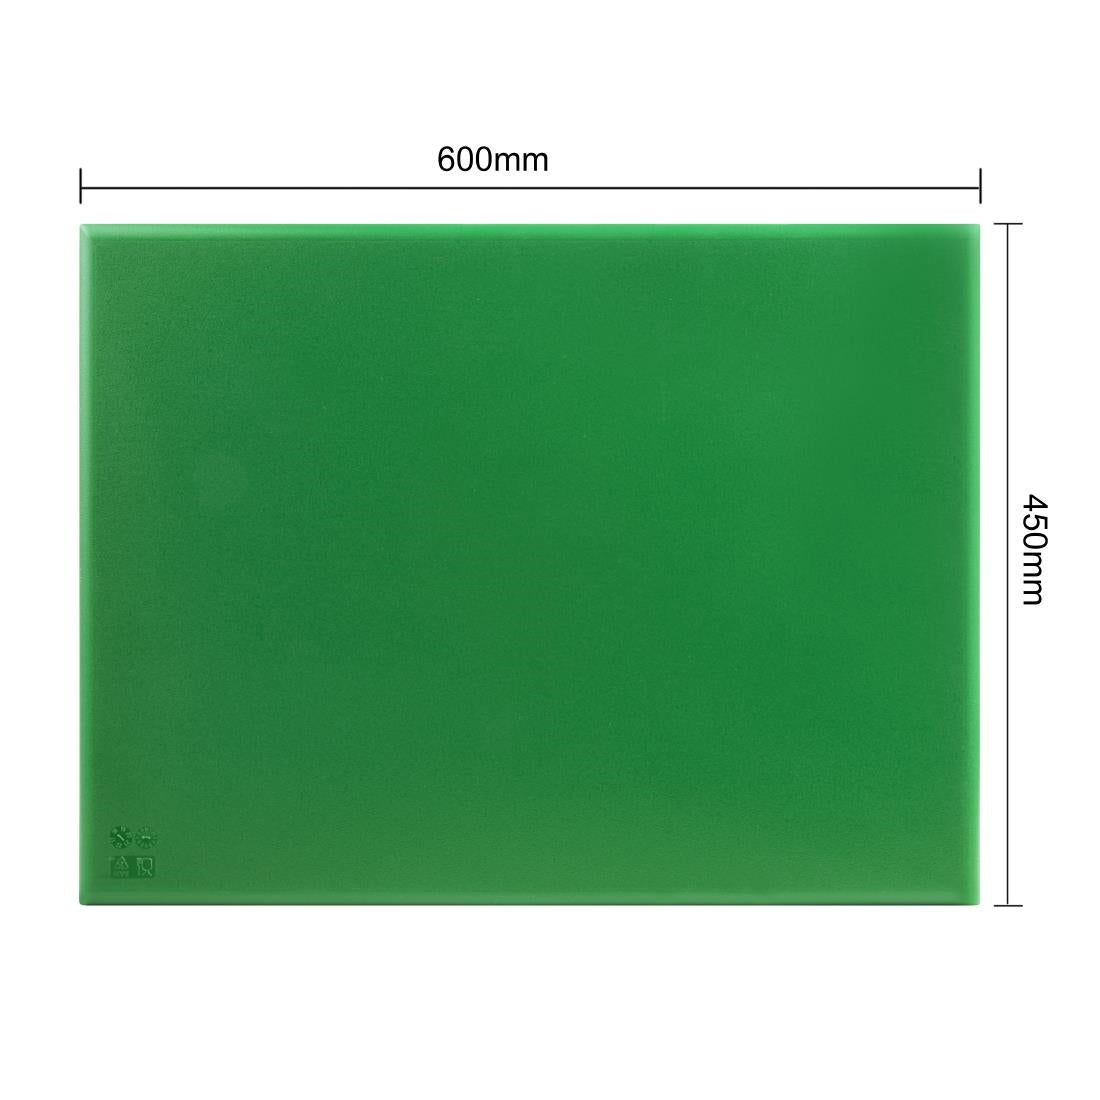 Hygiplas Extra Thick Low Density Green Chopping Board Large JD Catering Equipment Solutions Ltd